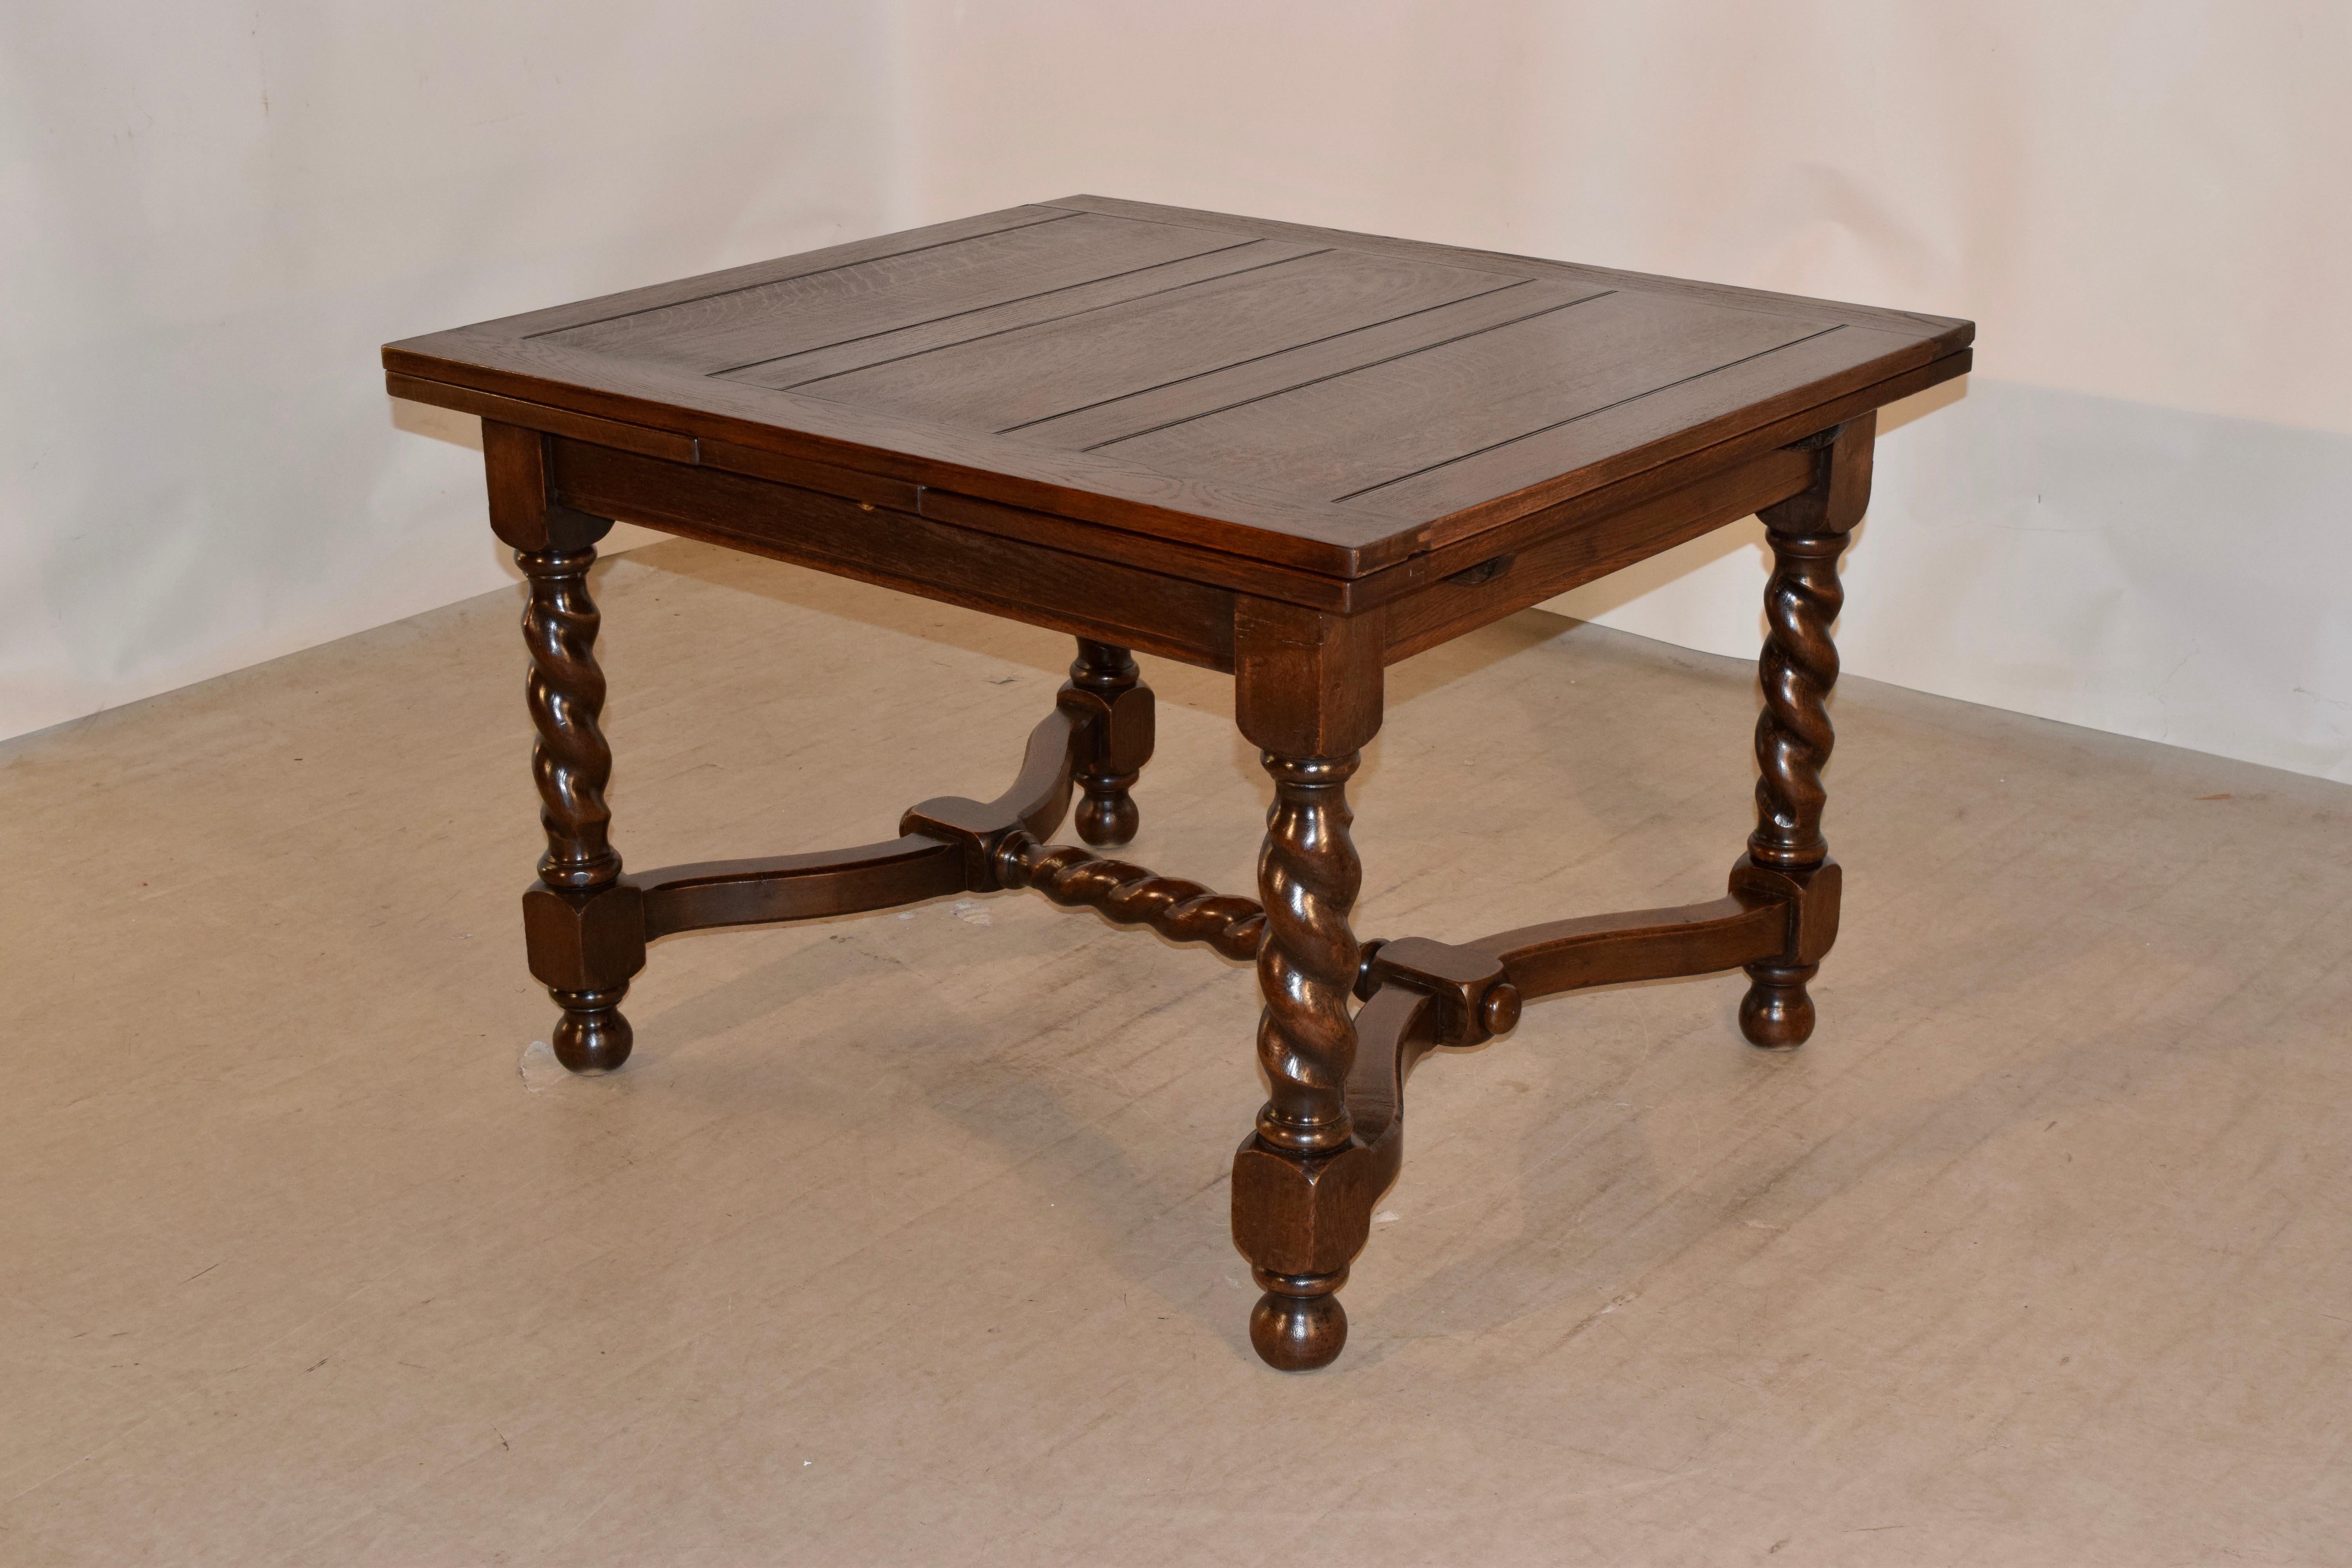 Edwardian English Oak Table with Draw Leaves, circa 1900